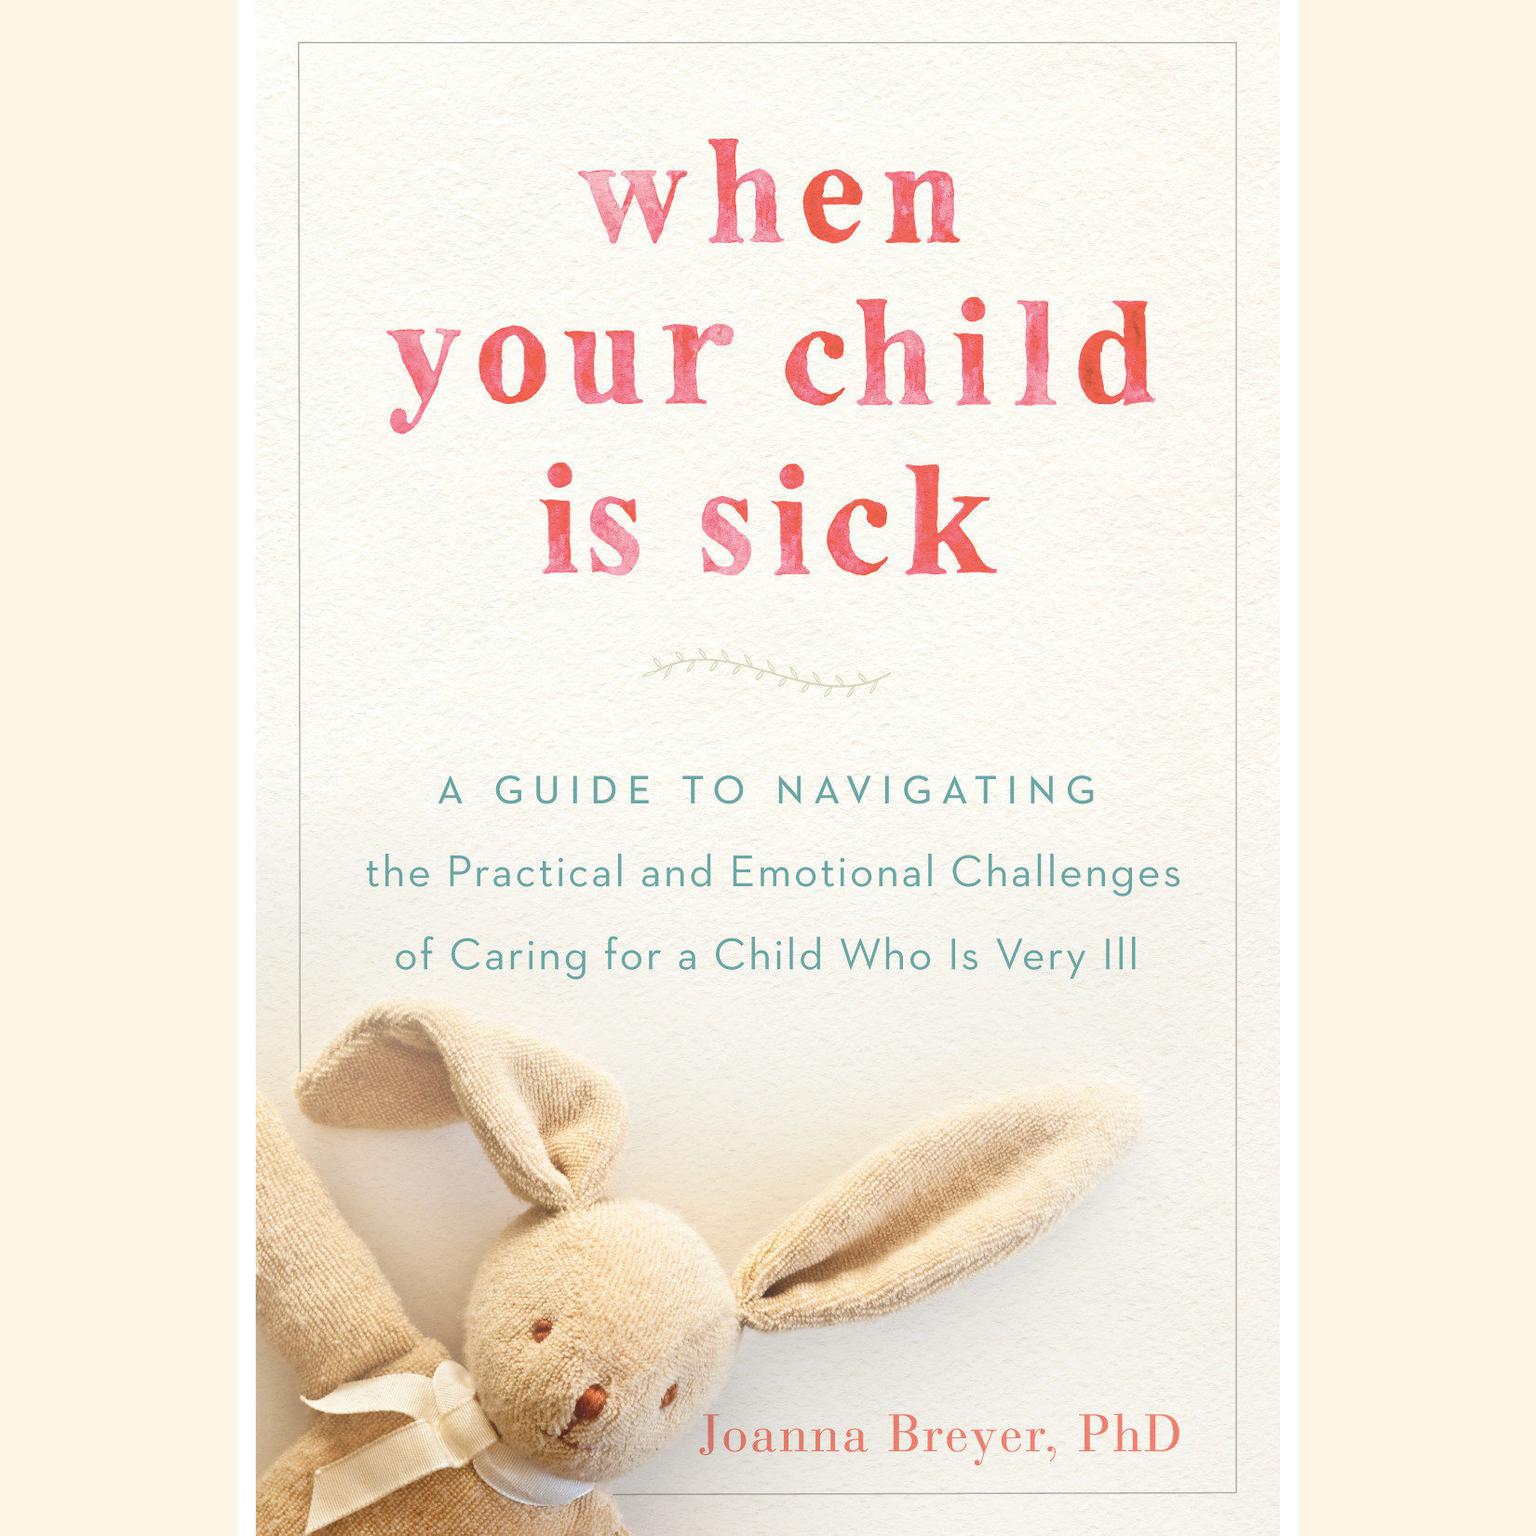 When Your Child Is Sick: A Guide to Navigating the Practical and Emotional Challenges of Caring for a Child Who Is Very Ill Audiobook, by Joanna Breyer